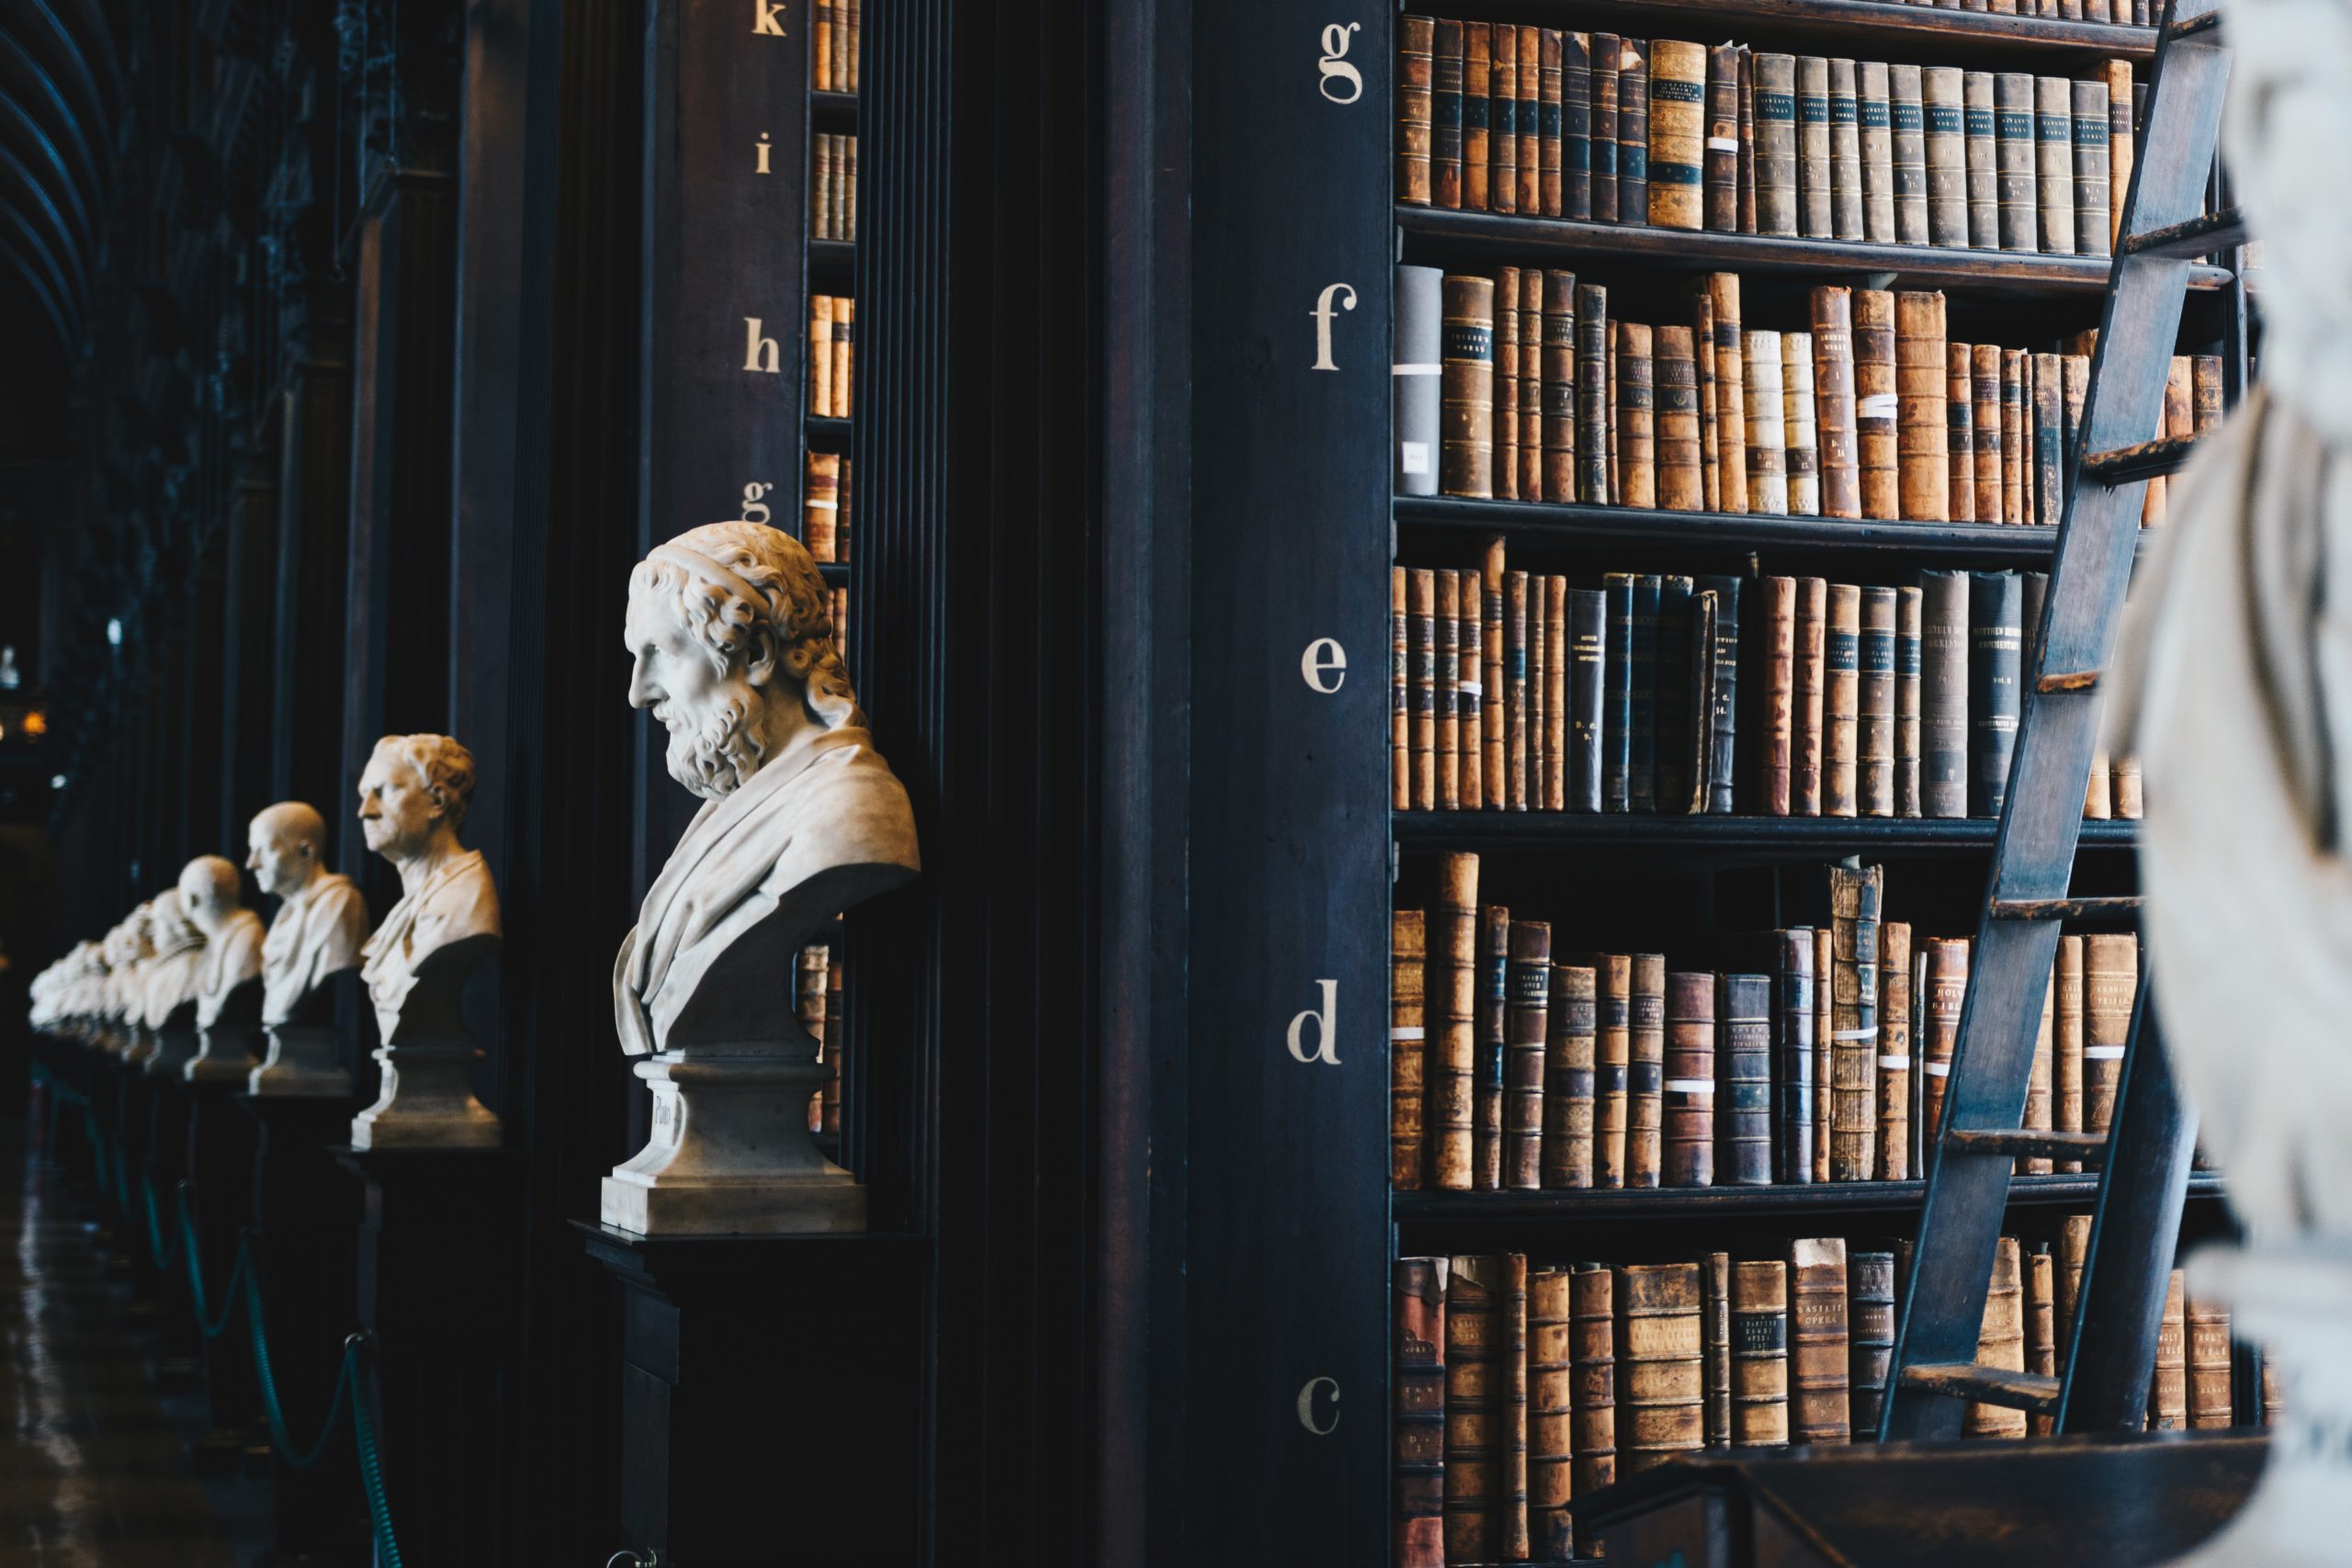 Picture of Busts in a library with books. Photo by Giammarco